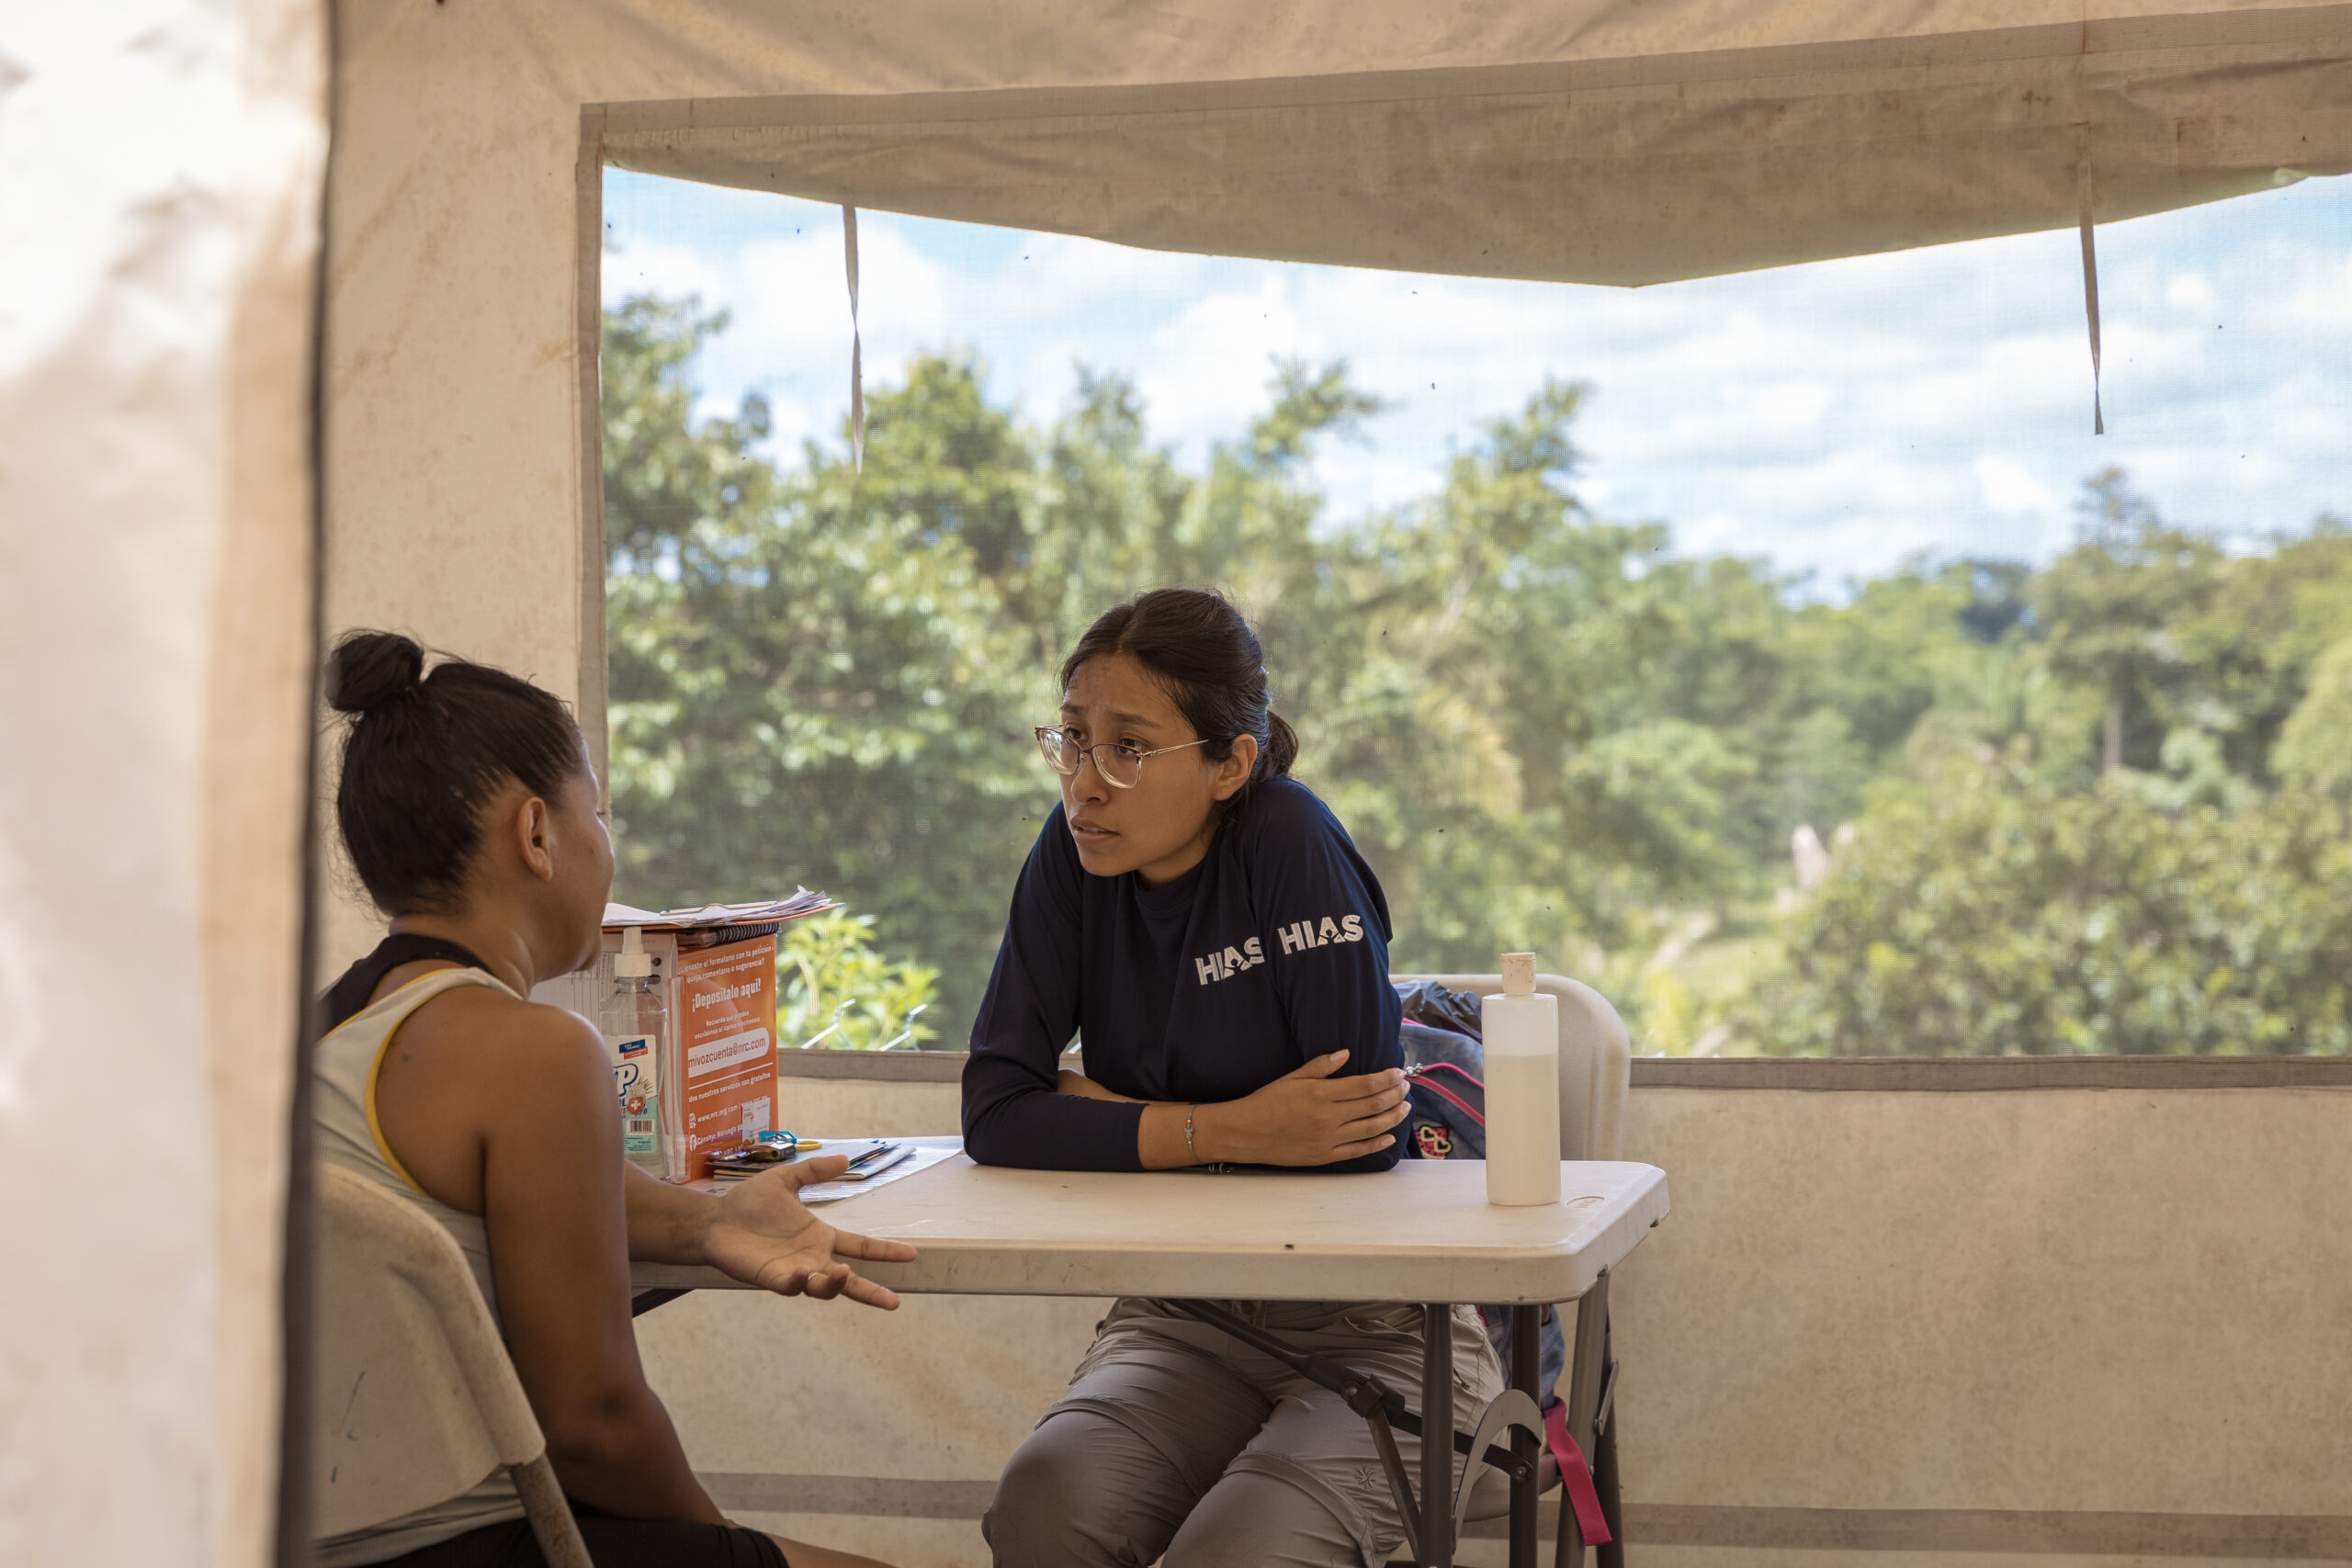 Darien Field Manager Daniela Montesinos talks with woman migrant at the Migration Reception Center in Lajas Blancas. Darien province, Panama. August 1, 2023.